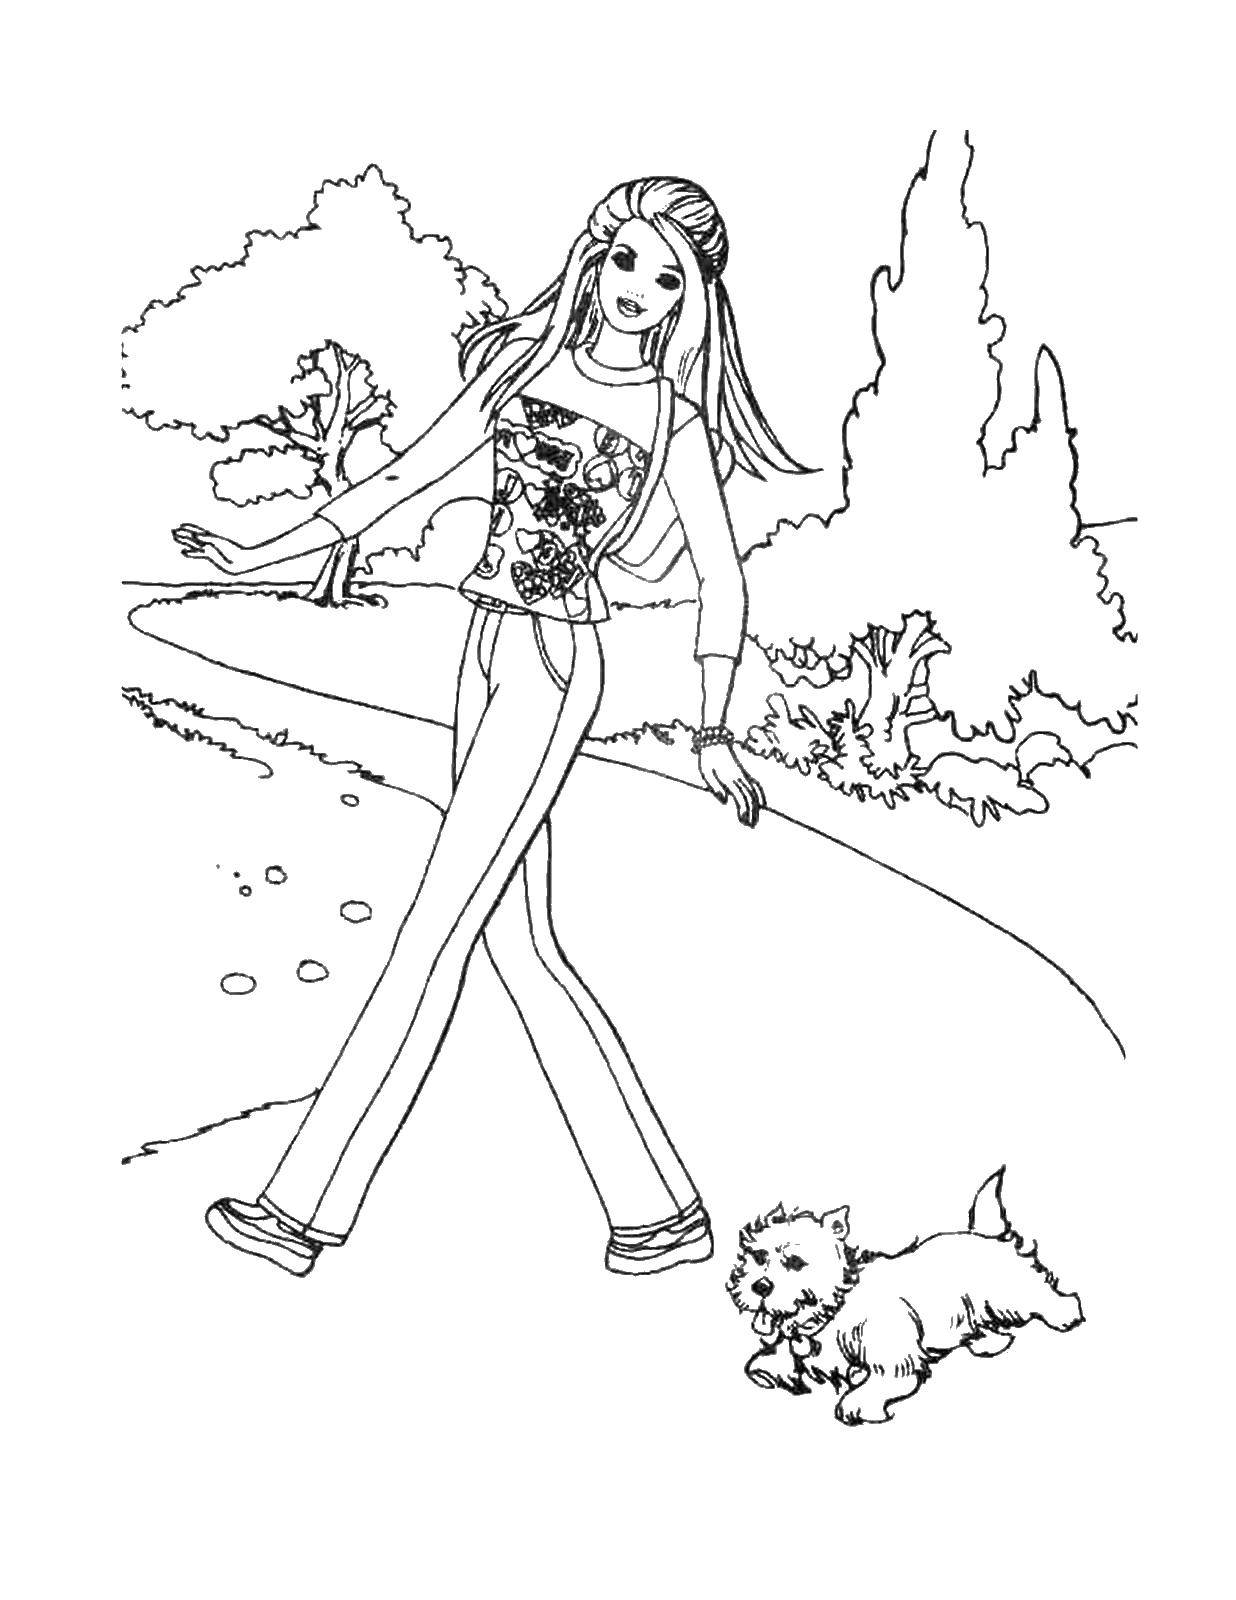 Coloring Barbie walking with dog. Category Barbie . Tags:  Barbie , model, dog.